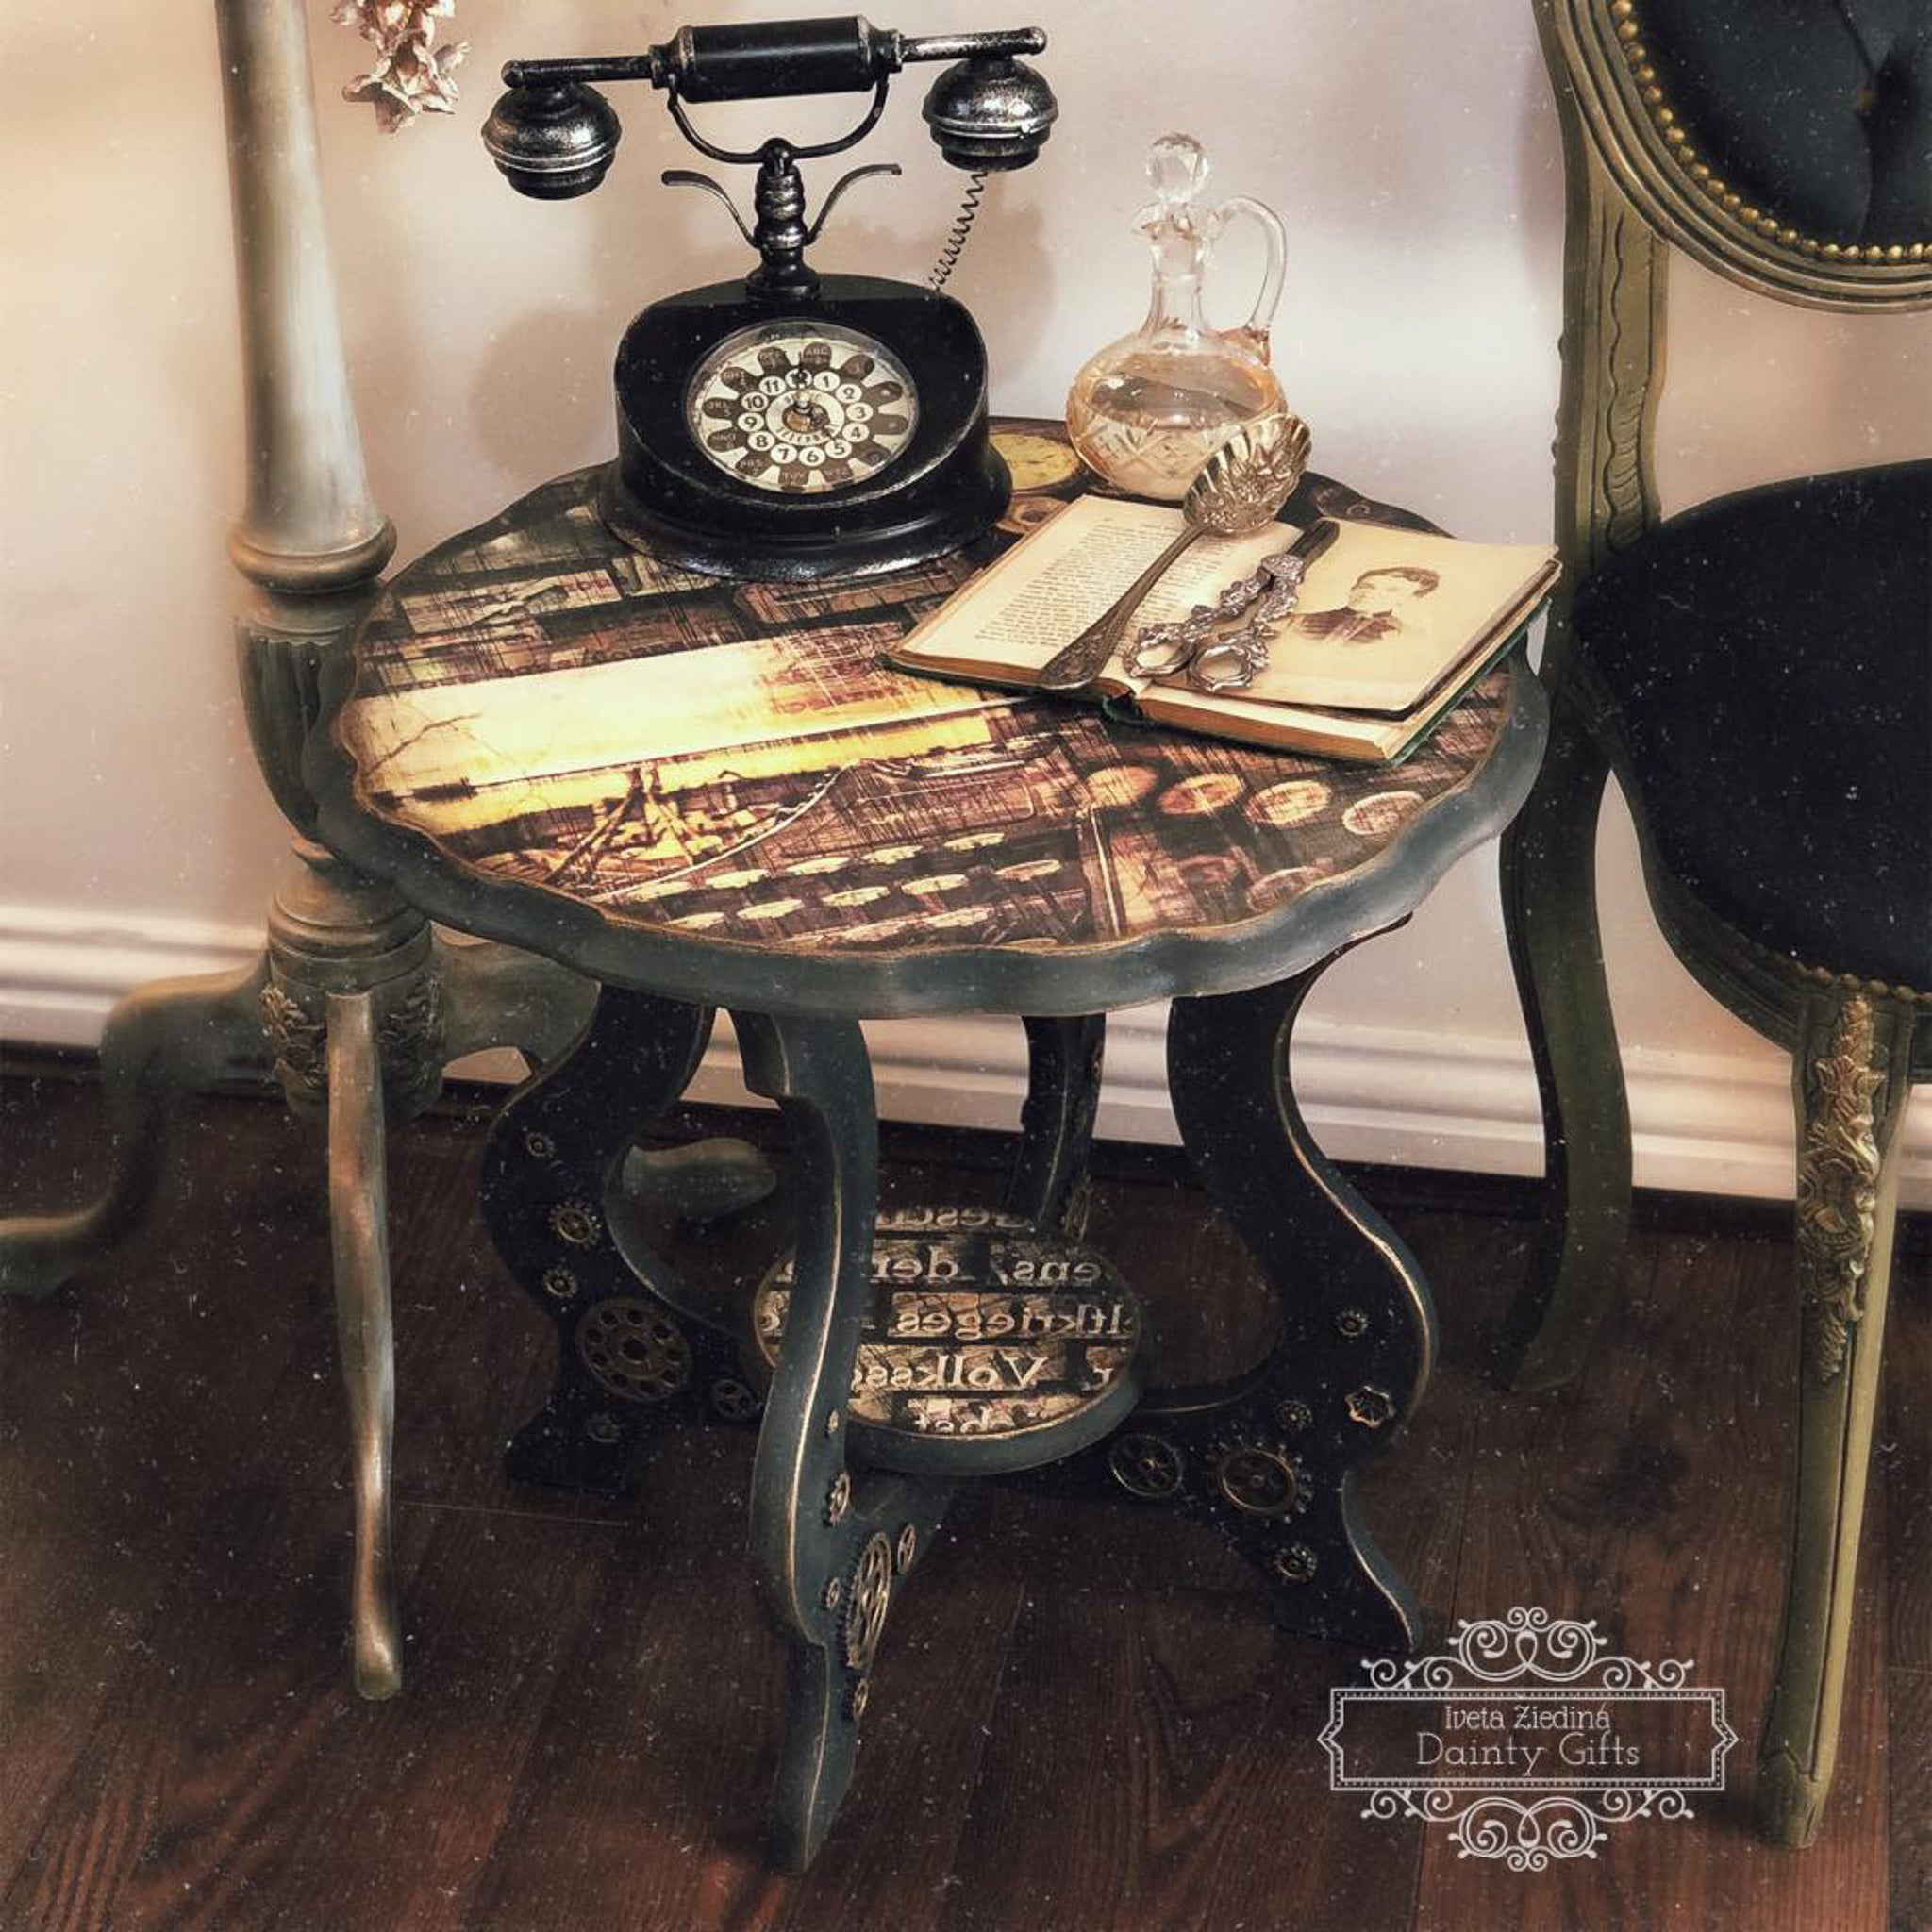 A vintage phone side table features The Press rice paper. An Iveta Ziedina Dainty Gifts logo is in the bottom right corner of the photo.